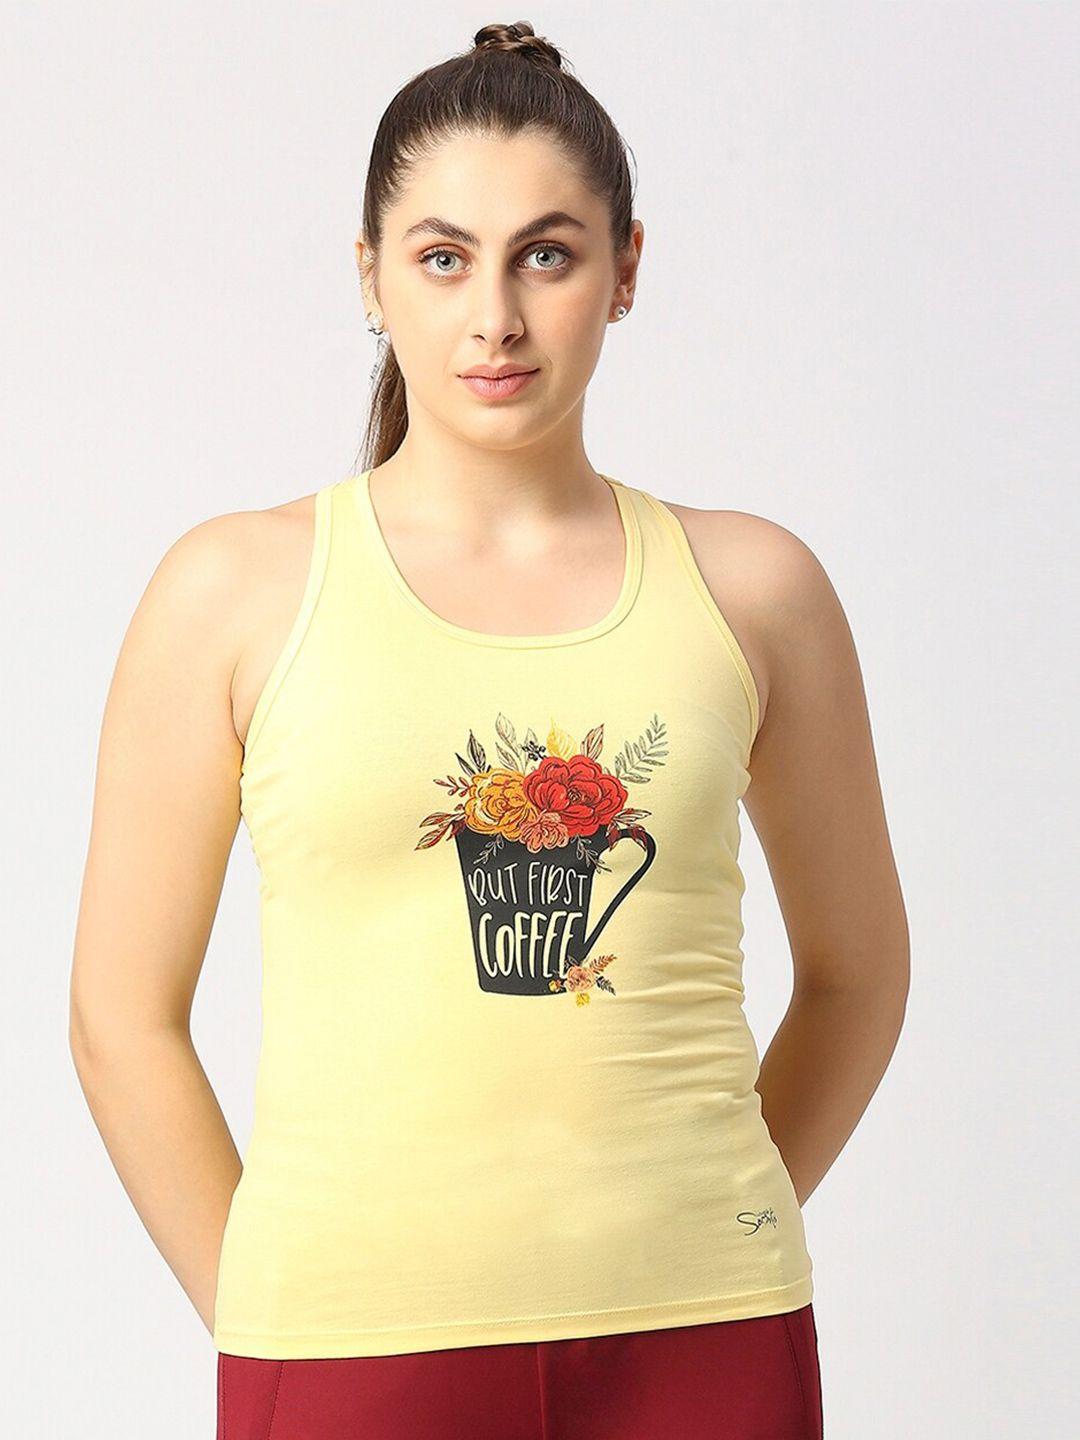 lovable sport graphic printed tank top